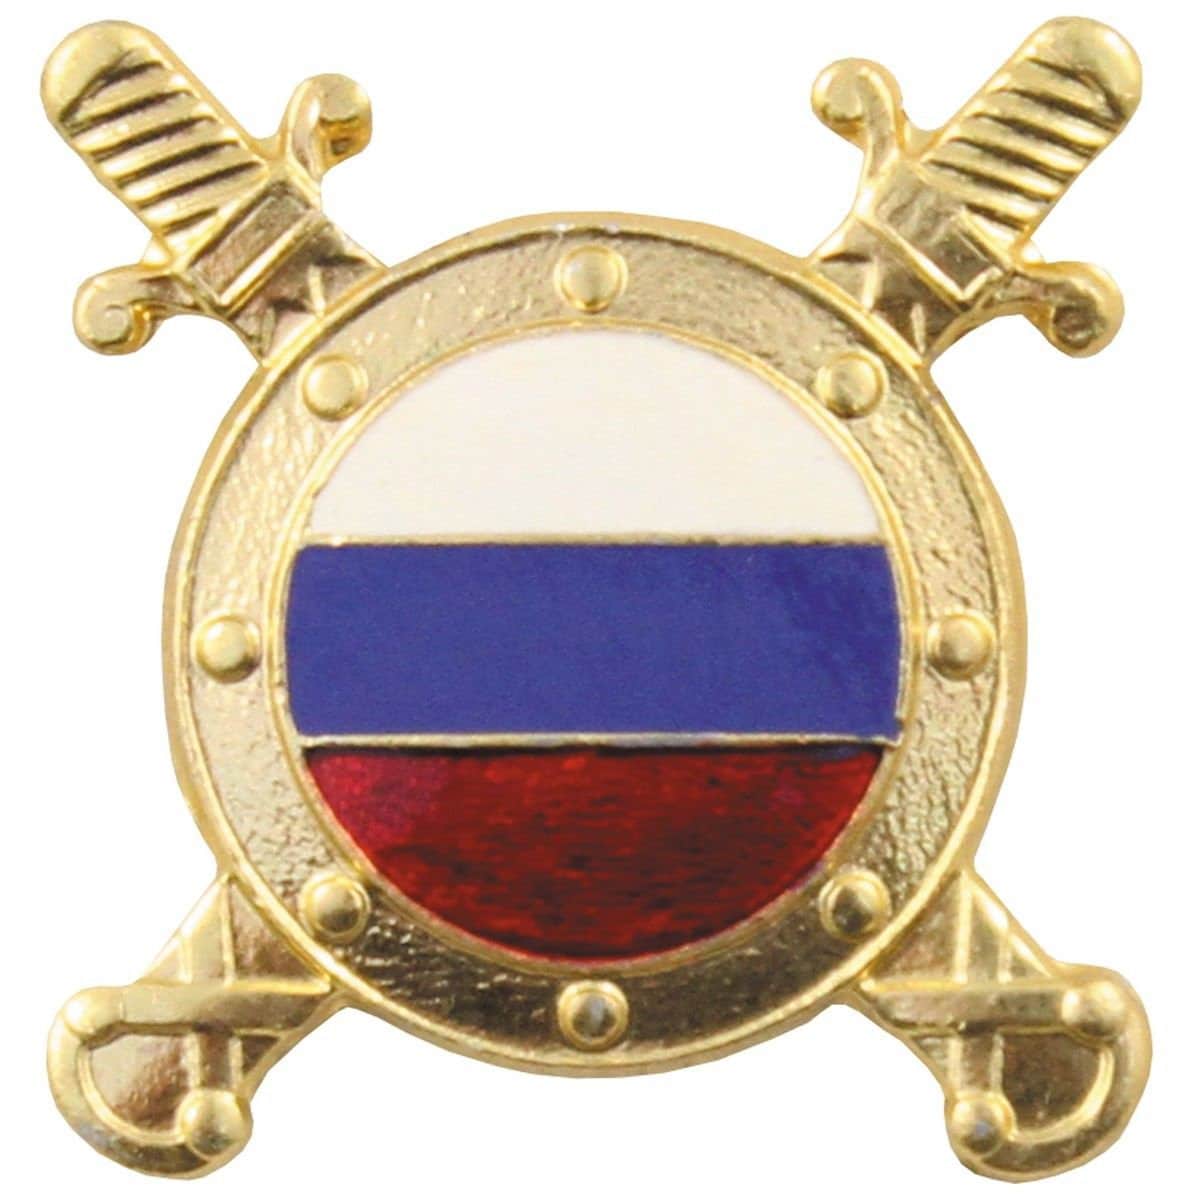 NEW Russian Army Military Internal Troops Hat Cap Badge Cockade 